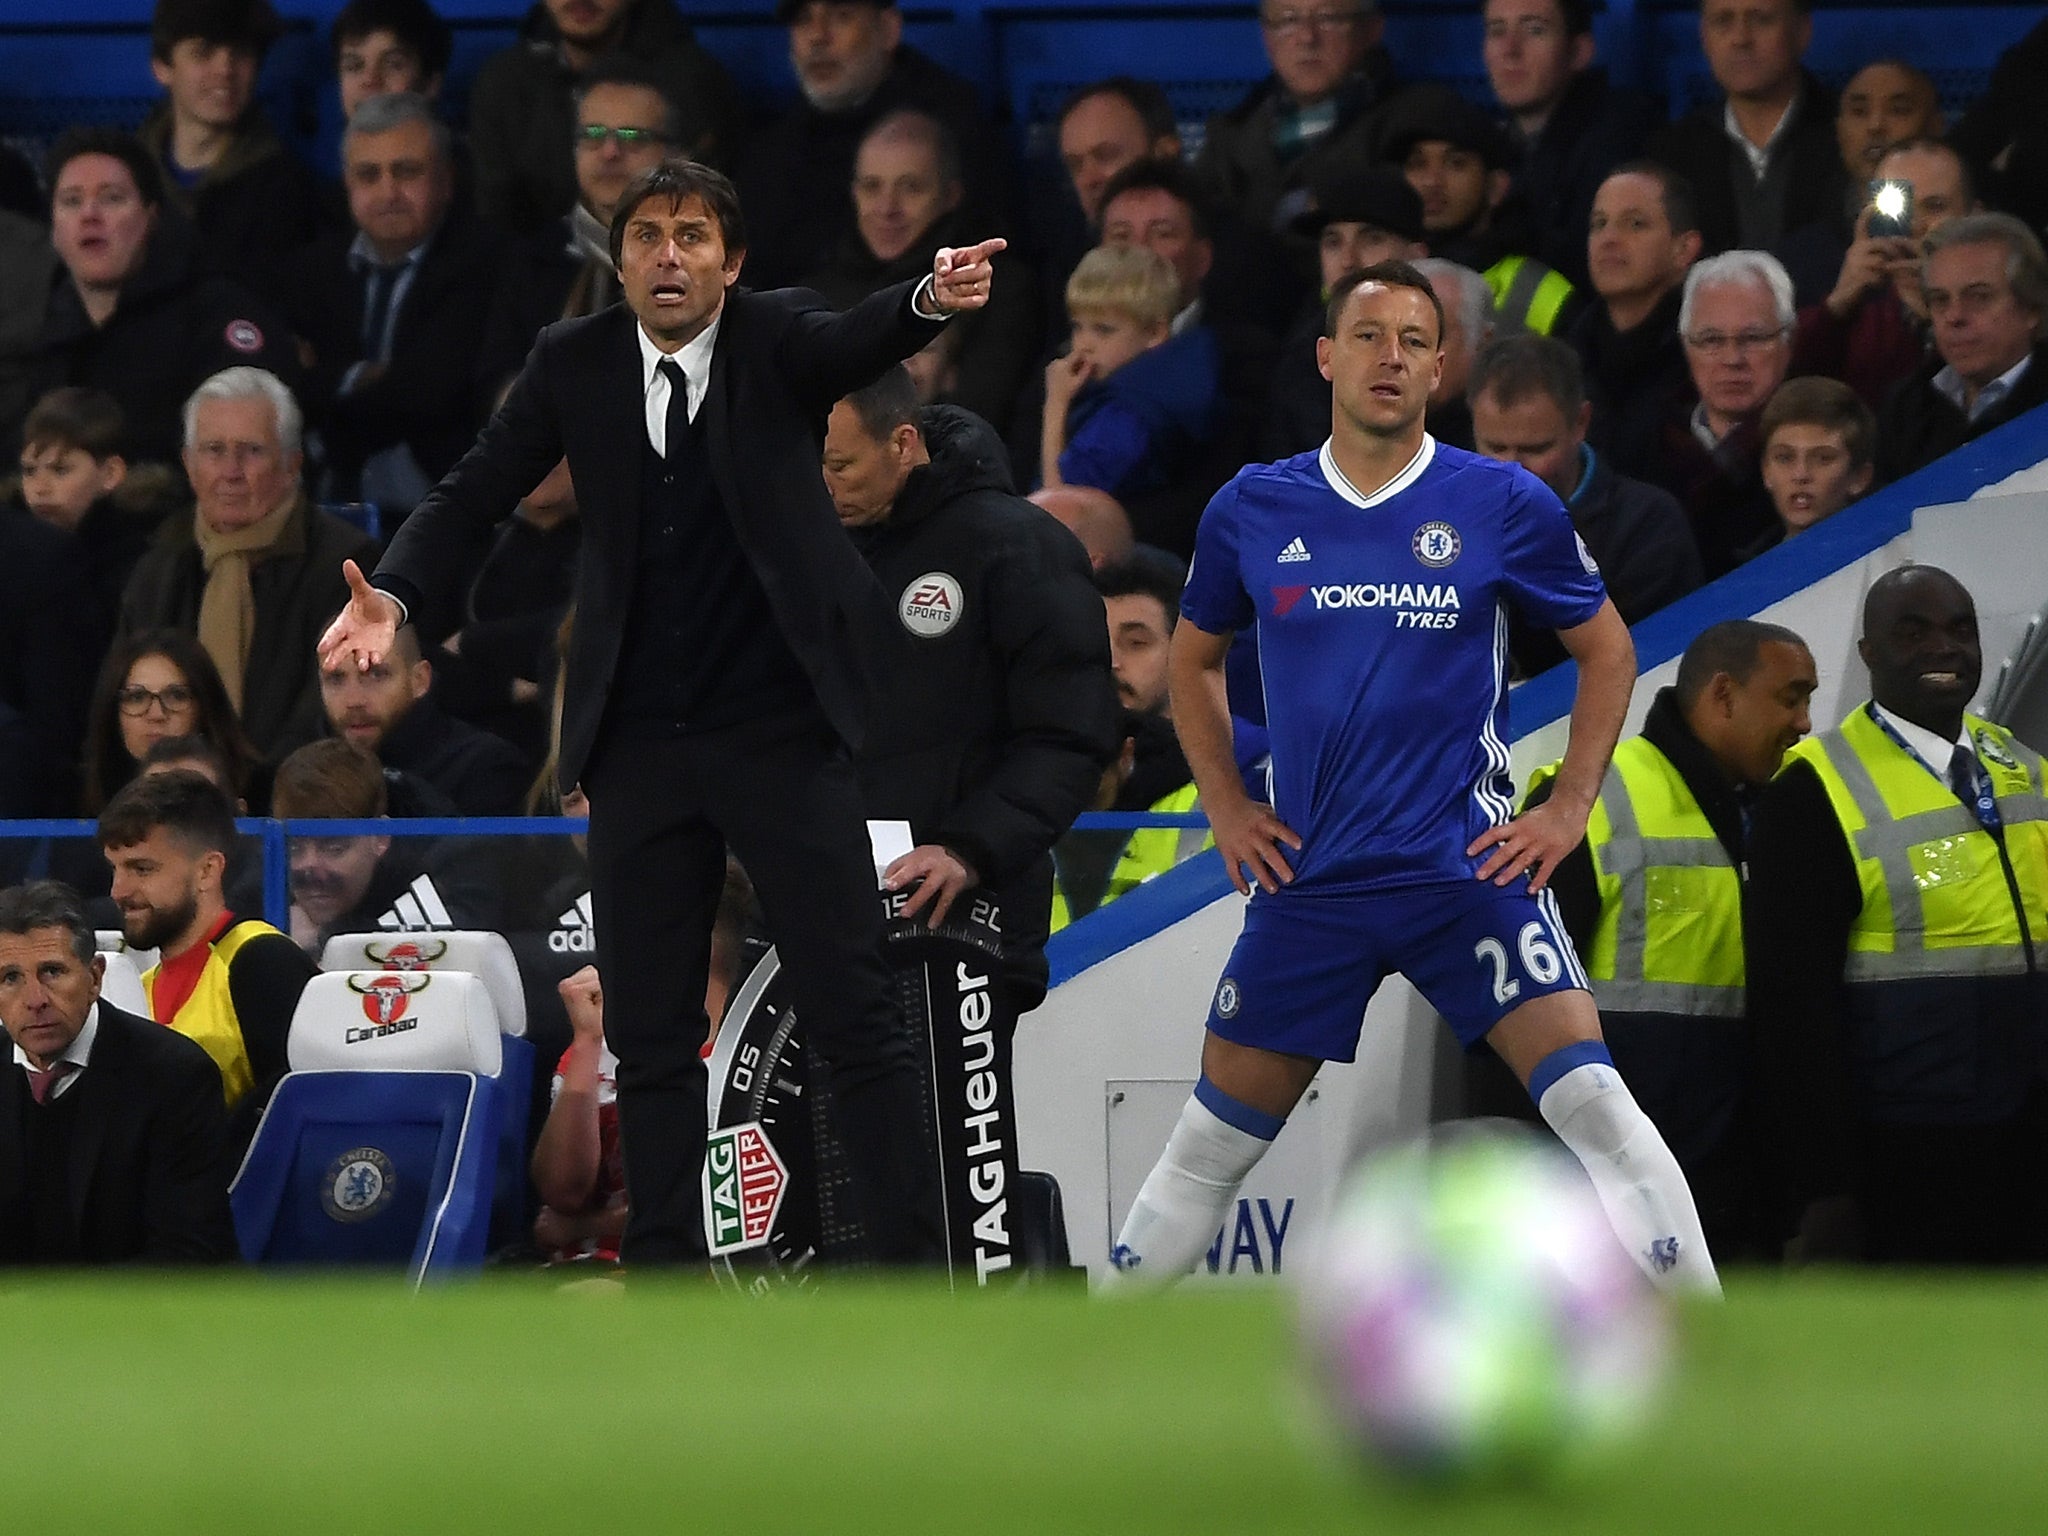 Antonio Conte often wishes he could take his frustrations out on the ball